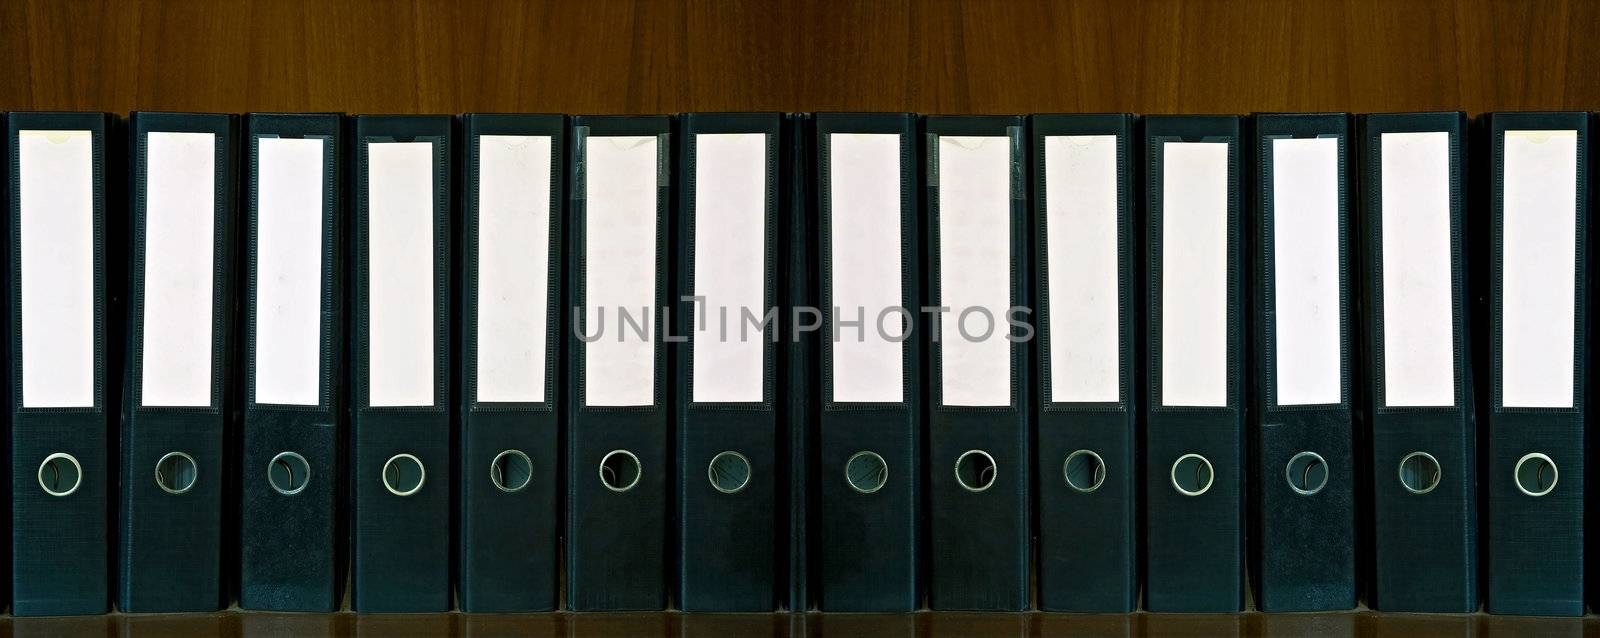 document Folders by vichie81